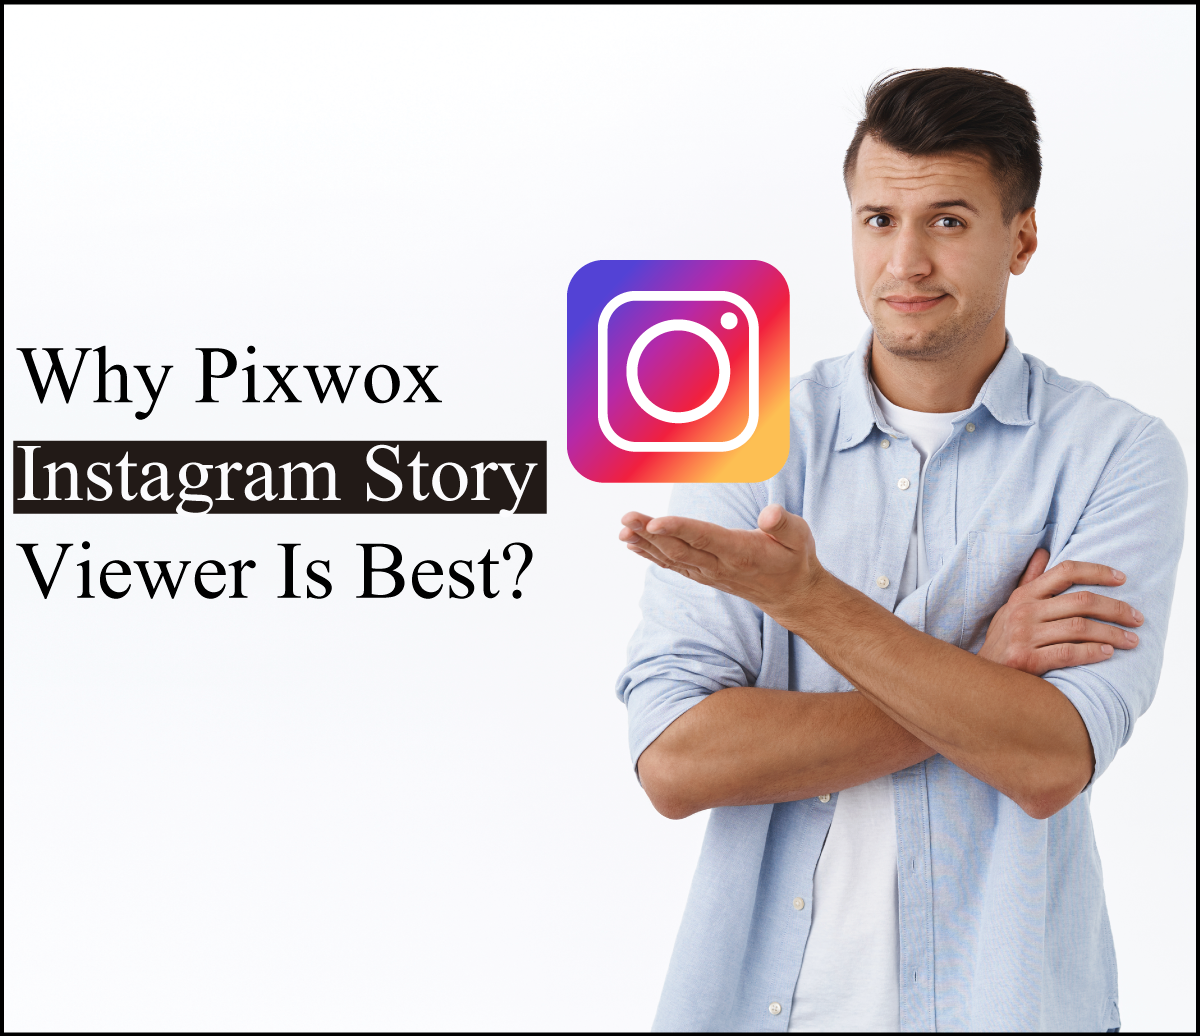 Why Pixwox Instagram Story Viewer Is Best?